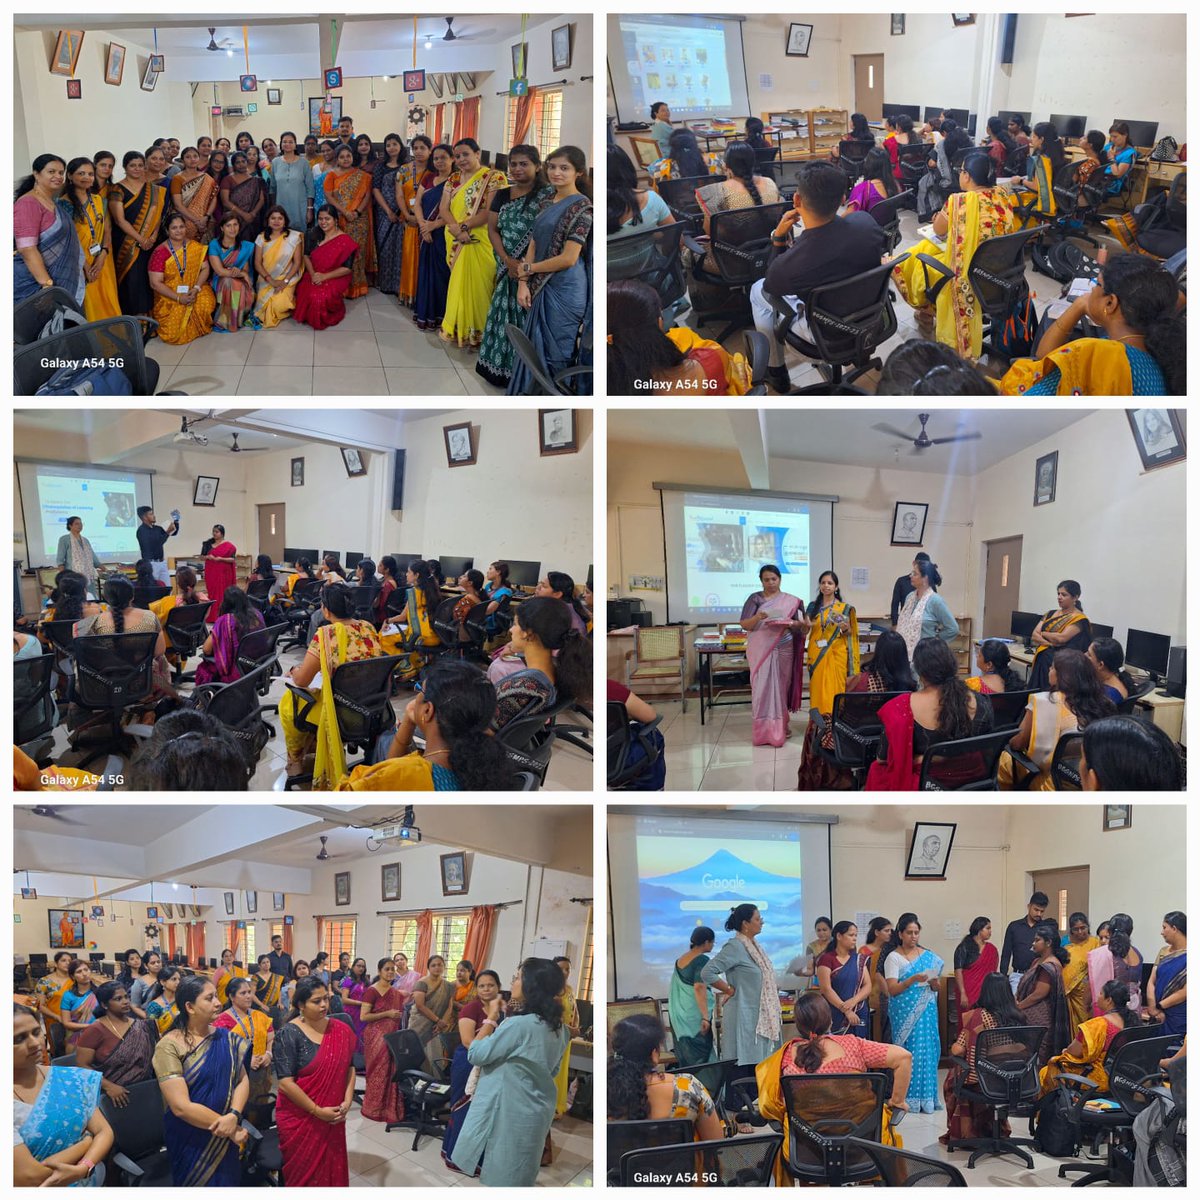 Empowering Swa-Teachers at BGS NPS School! From streamlined lesson planning to personalized student engagement, educators discovered how Swa-Adhyayan redefines the classroom experience. Resource Person: Mrs. Deepa
.
.
#TeacherEmpowerment #SwaAdhyayanLMS #TransformingEducation